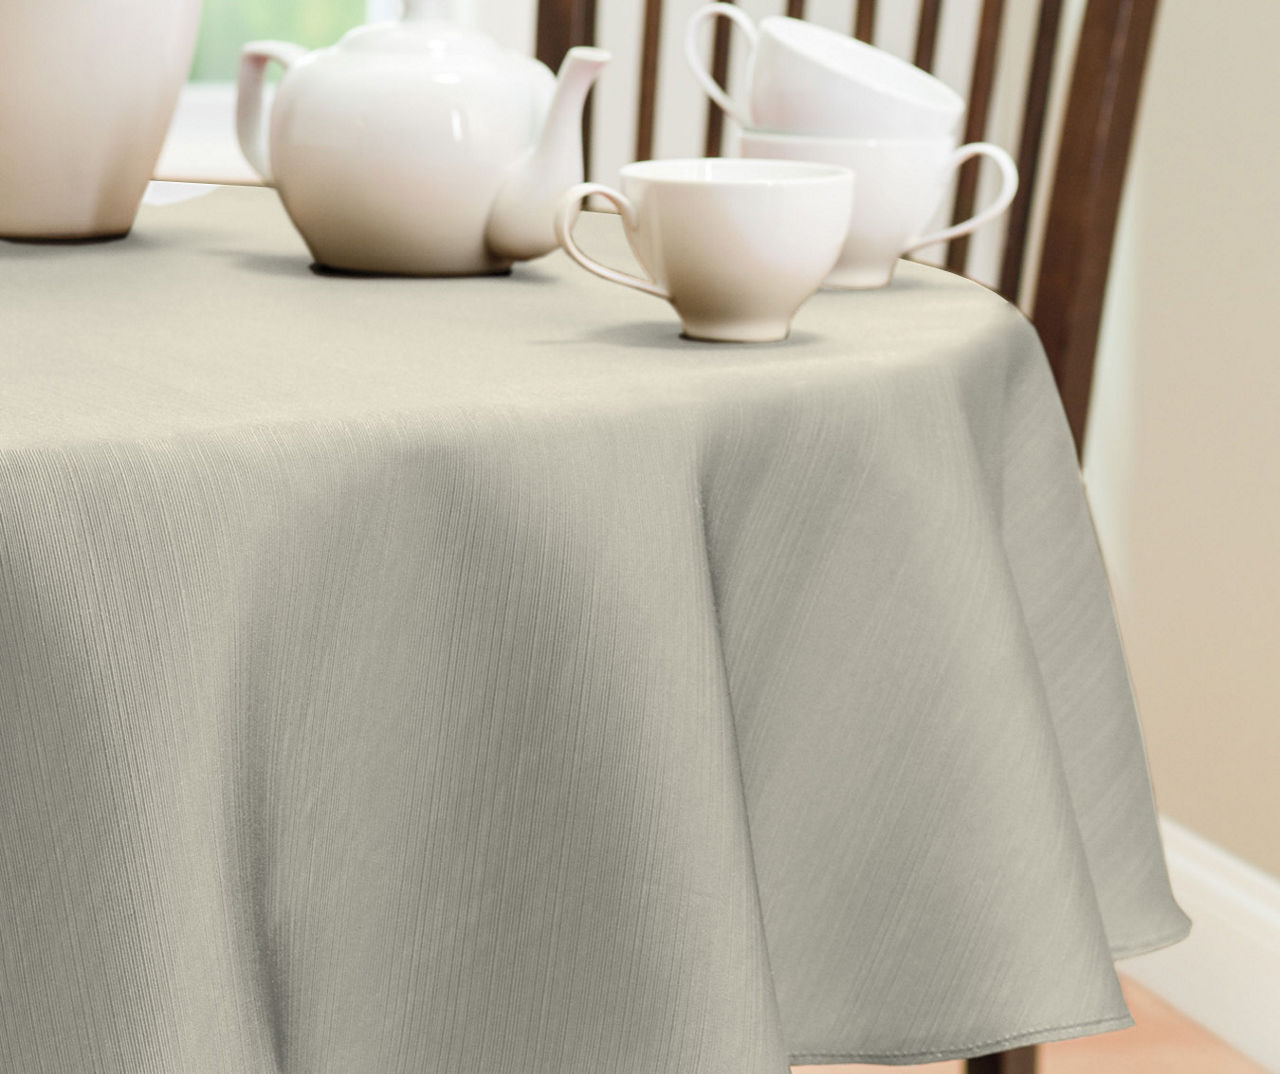 Antique White Round Fabric Tablecloth, (70")